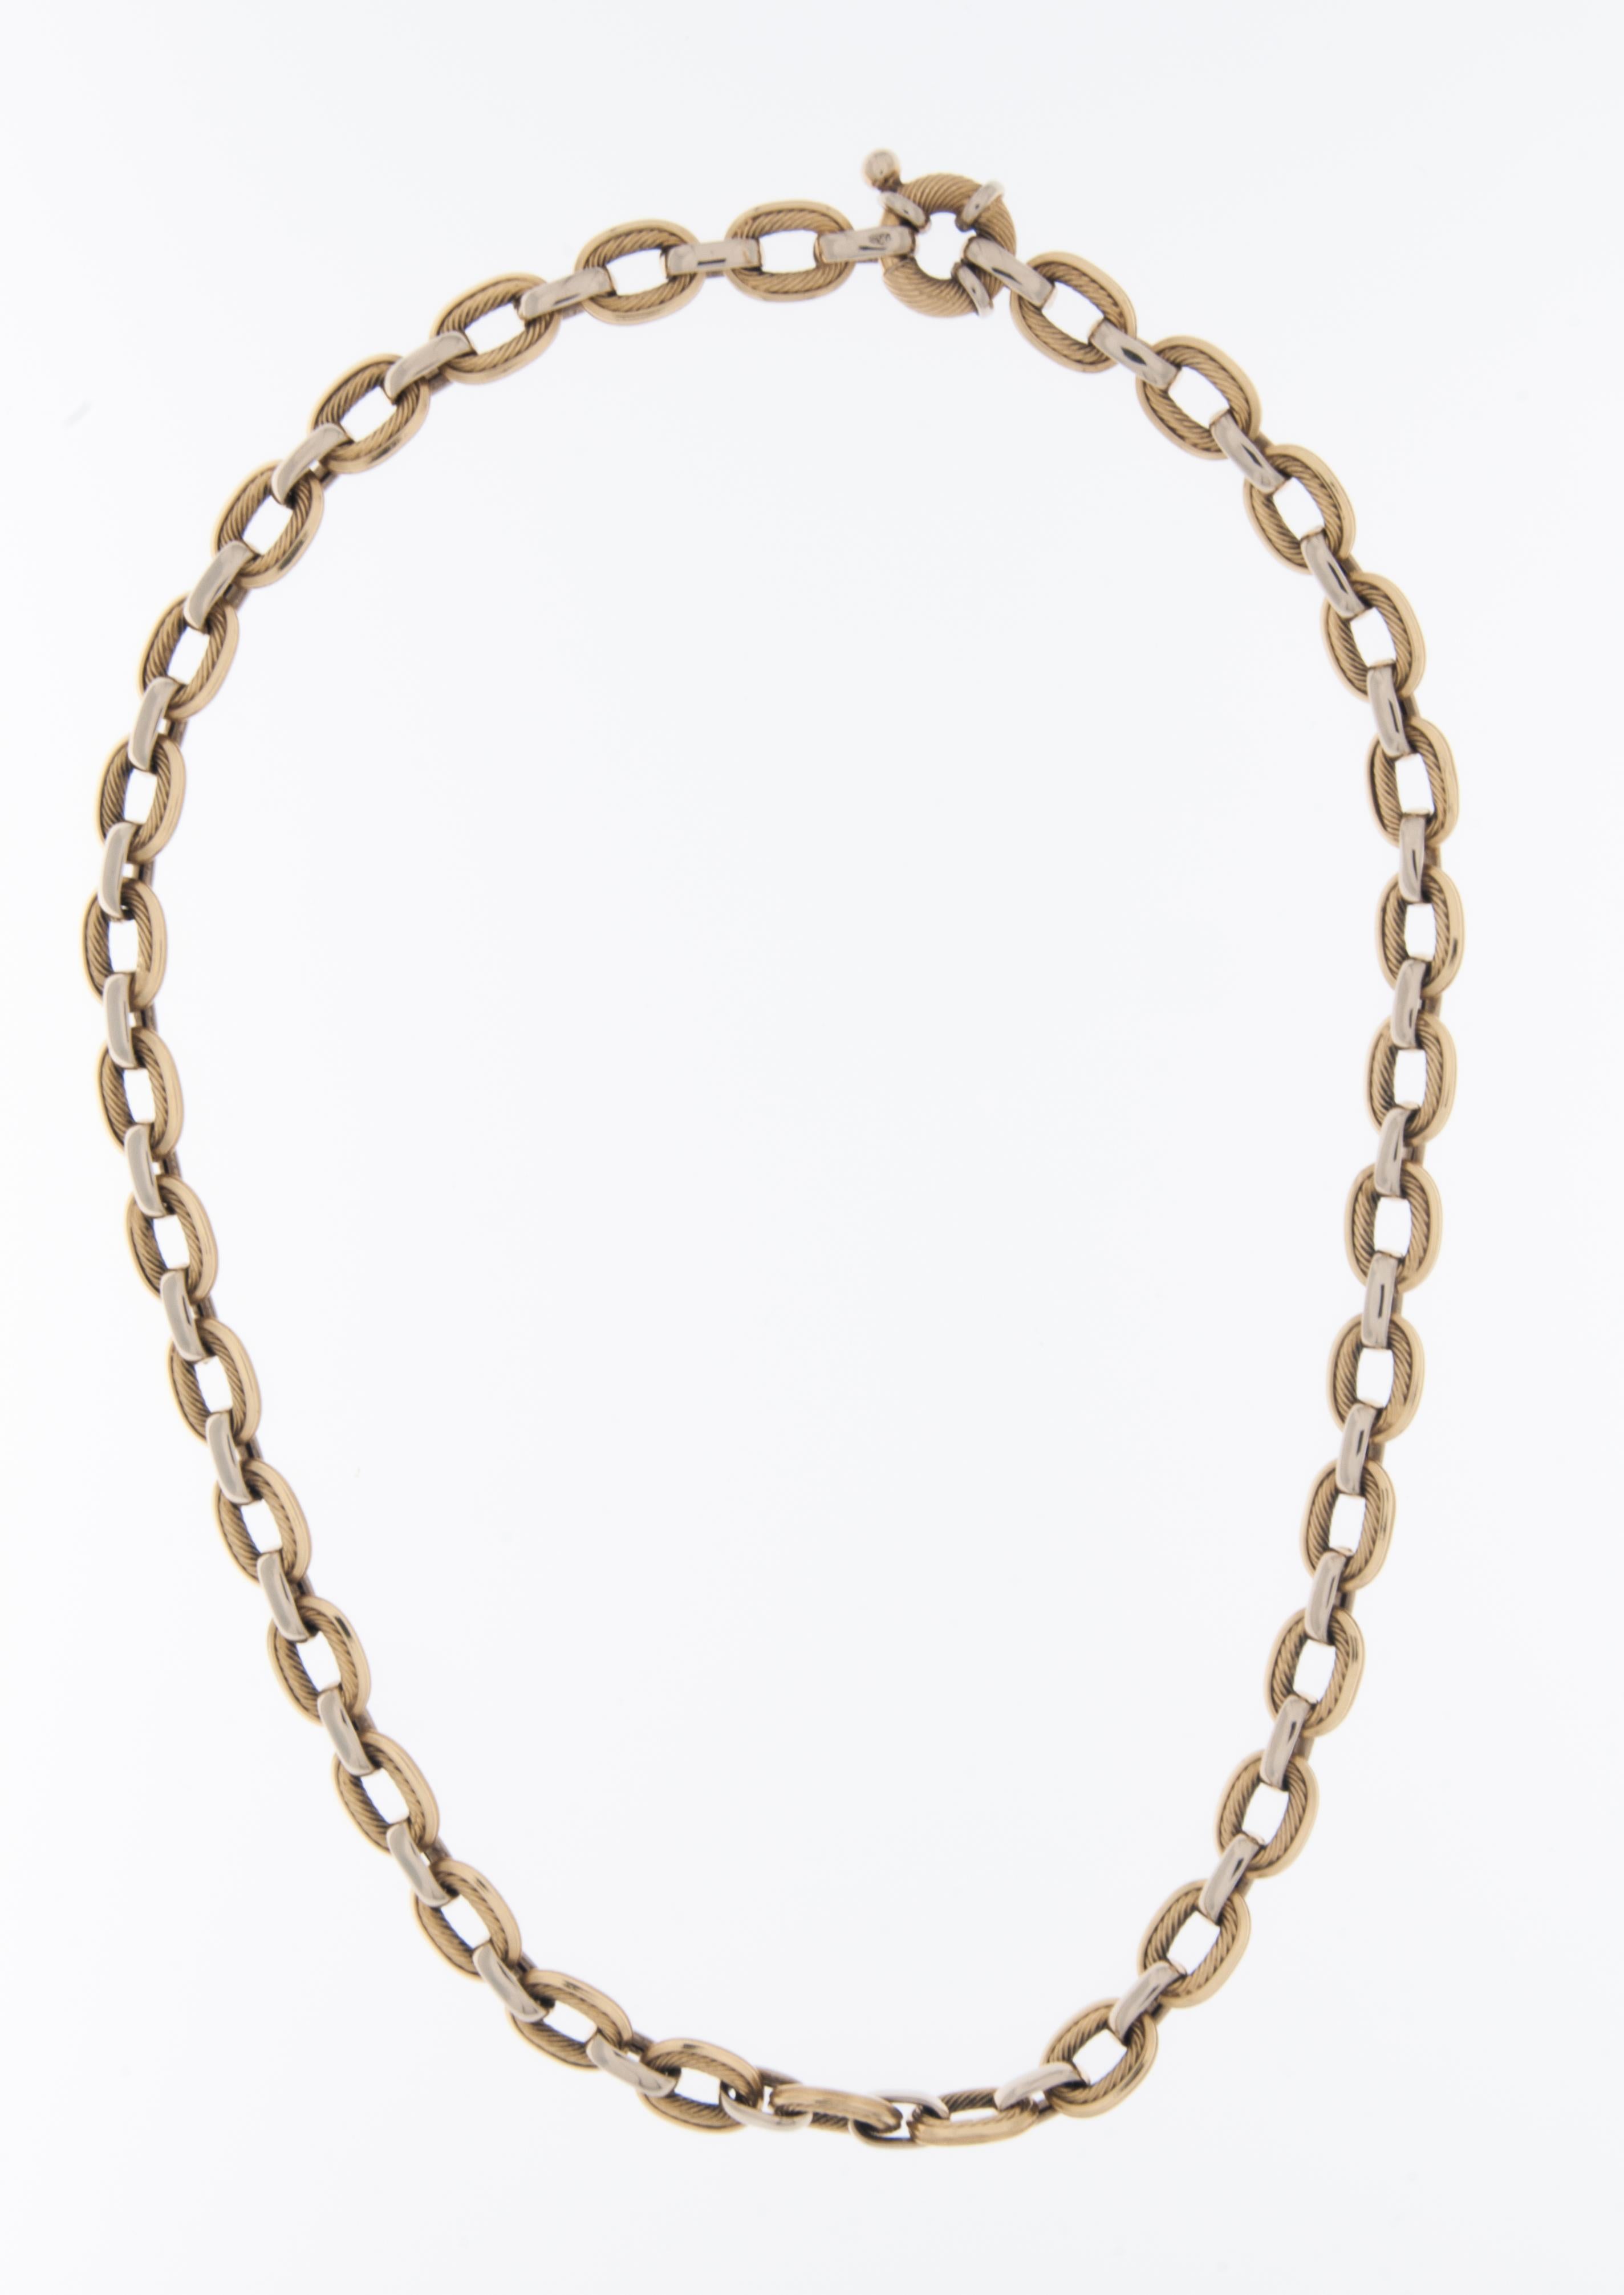 The Vintage Italian 18kt Gold Necklace is a distinctive and timeless piece of jewelry that reflects the craftsmanship and artistry of Italian design. Crafted from high-quality 18-karat yellow and white gold, this necklace exudes a warm and rich